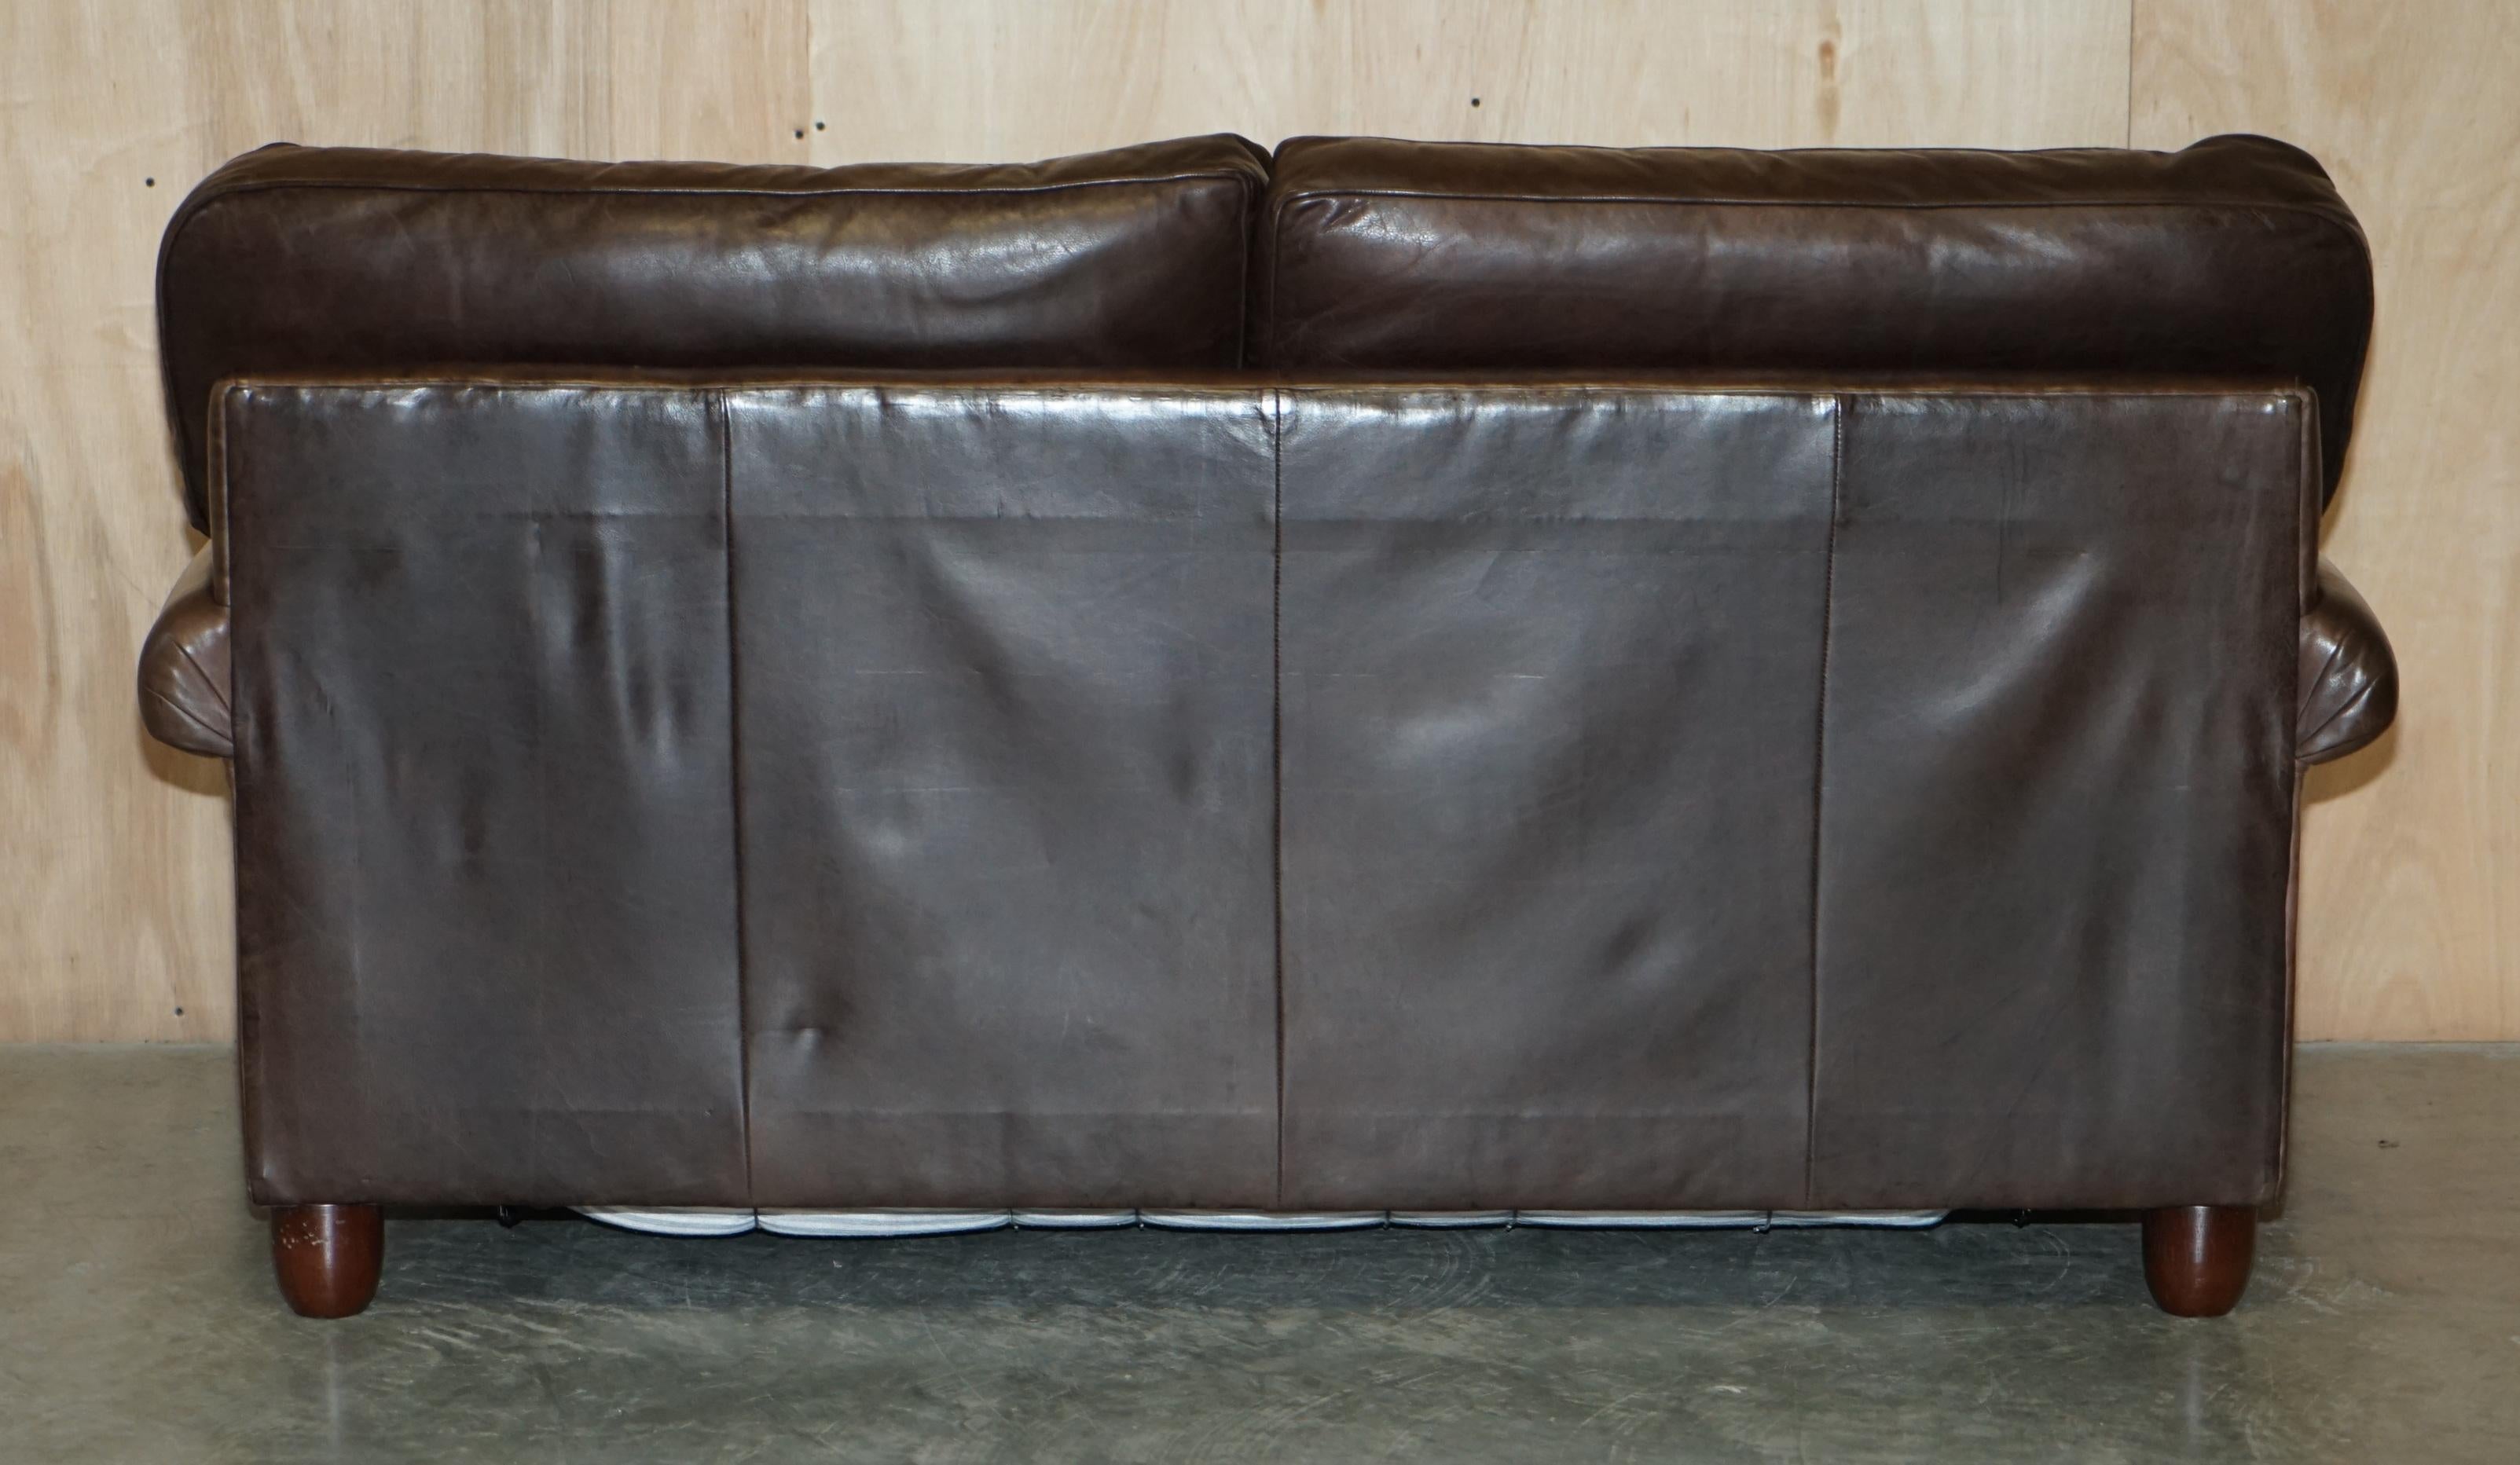 LOVELY HERITAGE BROWN LEATHER LAURA ASHLEY MORTIMER SOFABED IN SEHR GUTEM ZUSTAND im Angebot 5